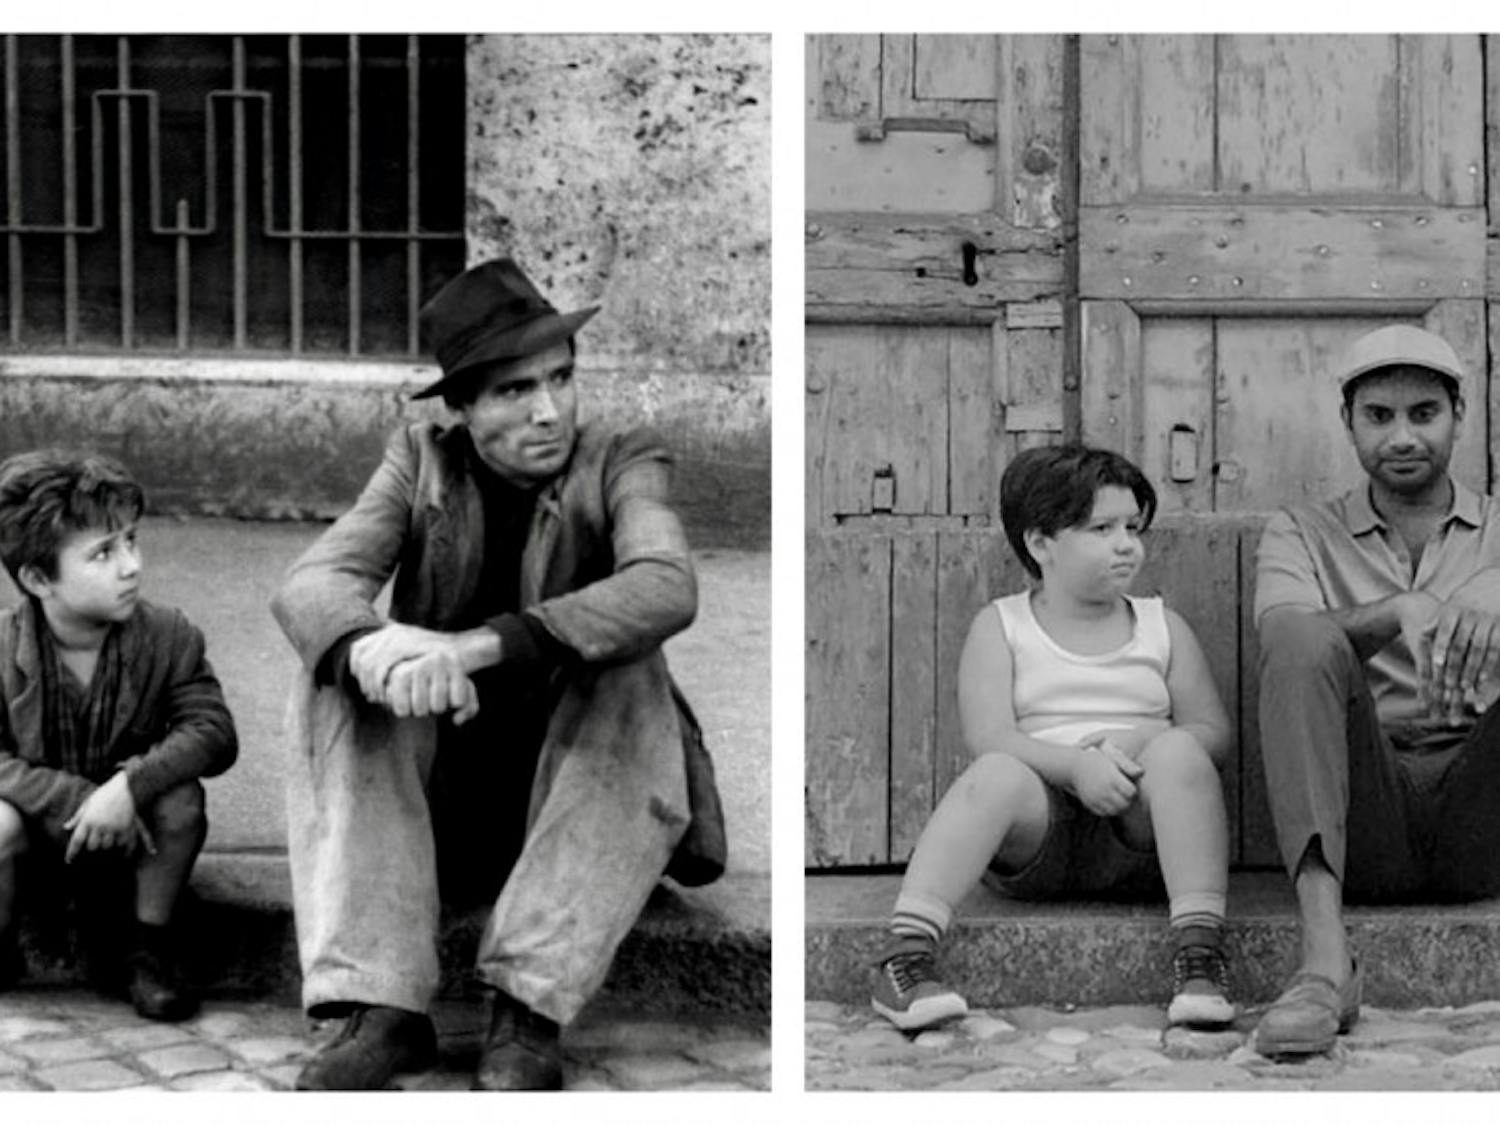 The classic '40s film "Bicycle Thieves" has influenced various works within modern entertainment such as "Master of None."